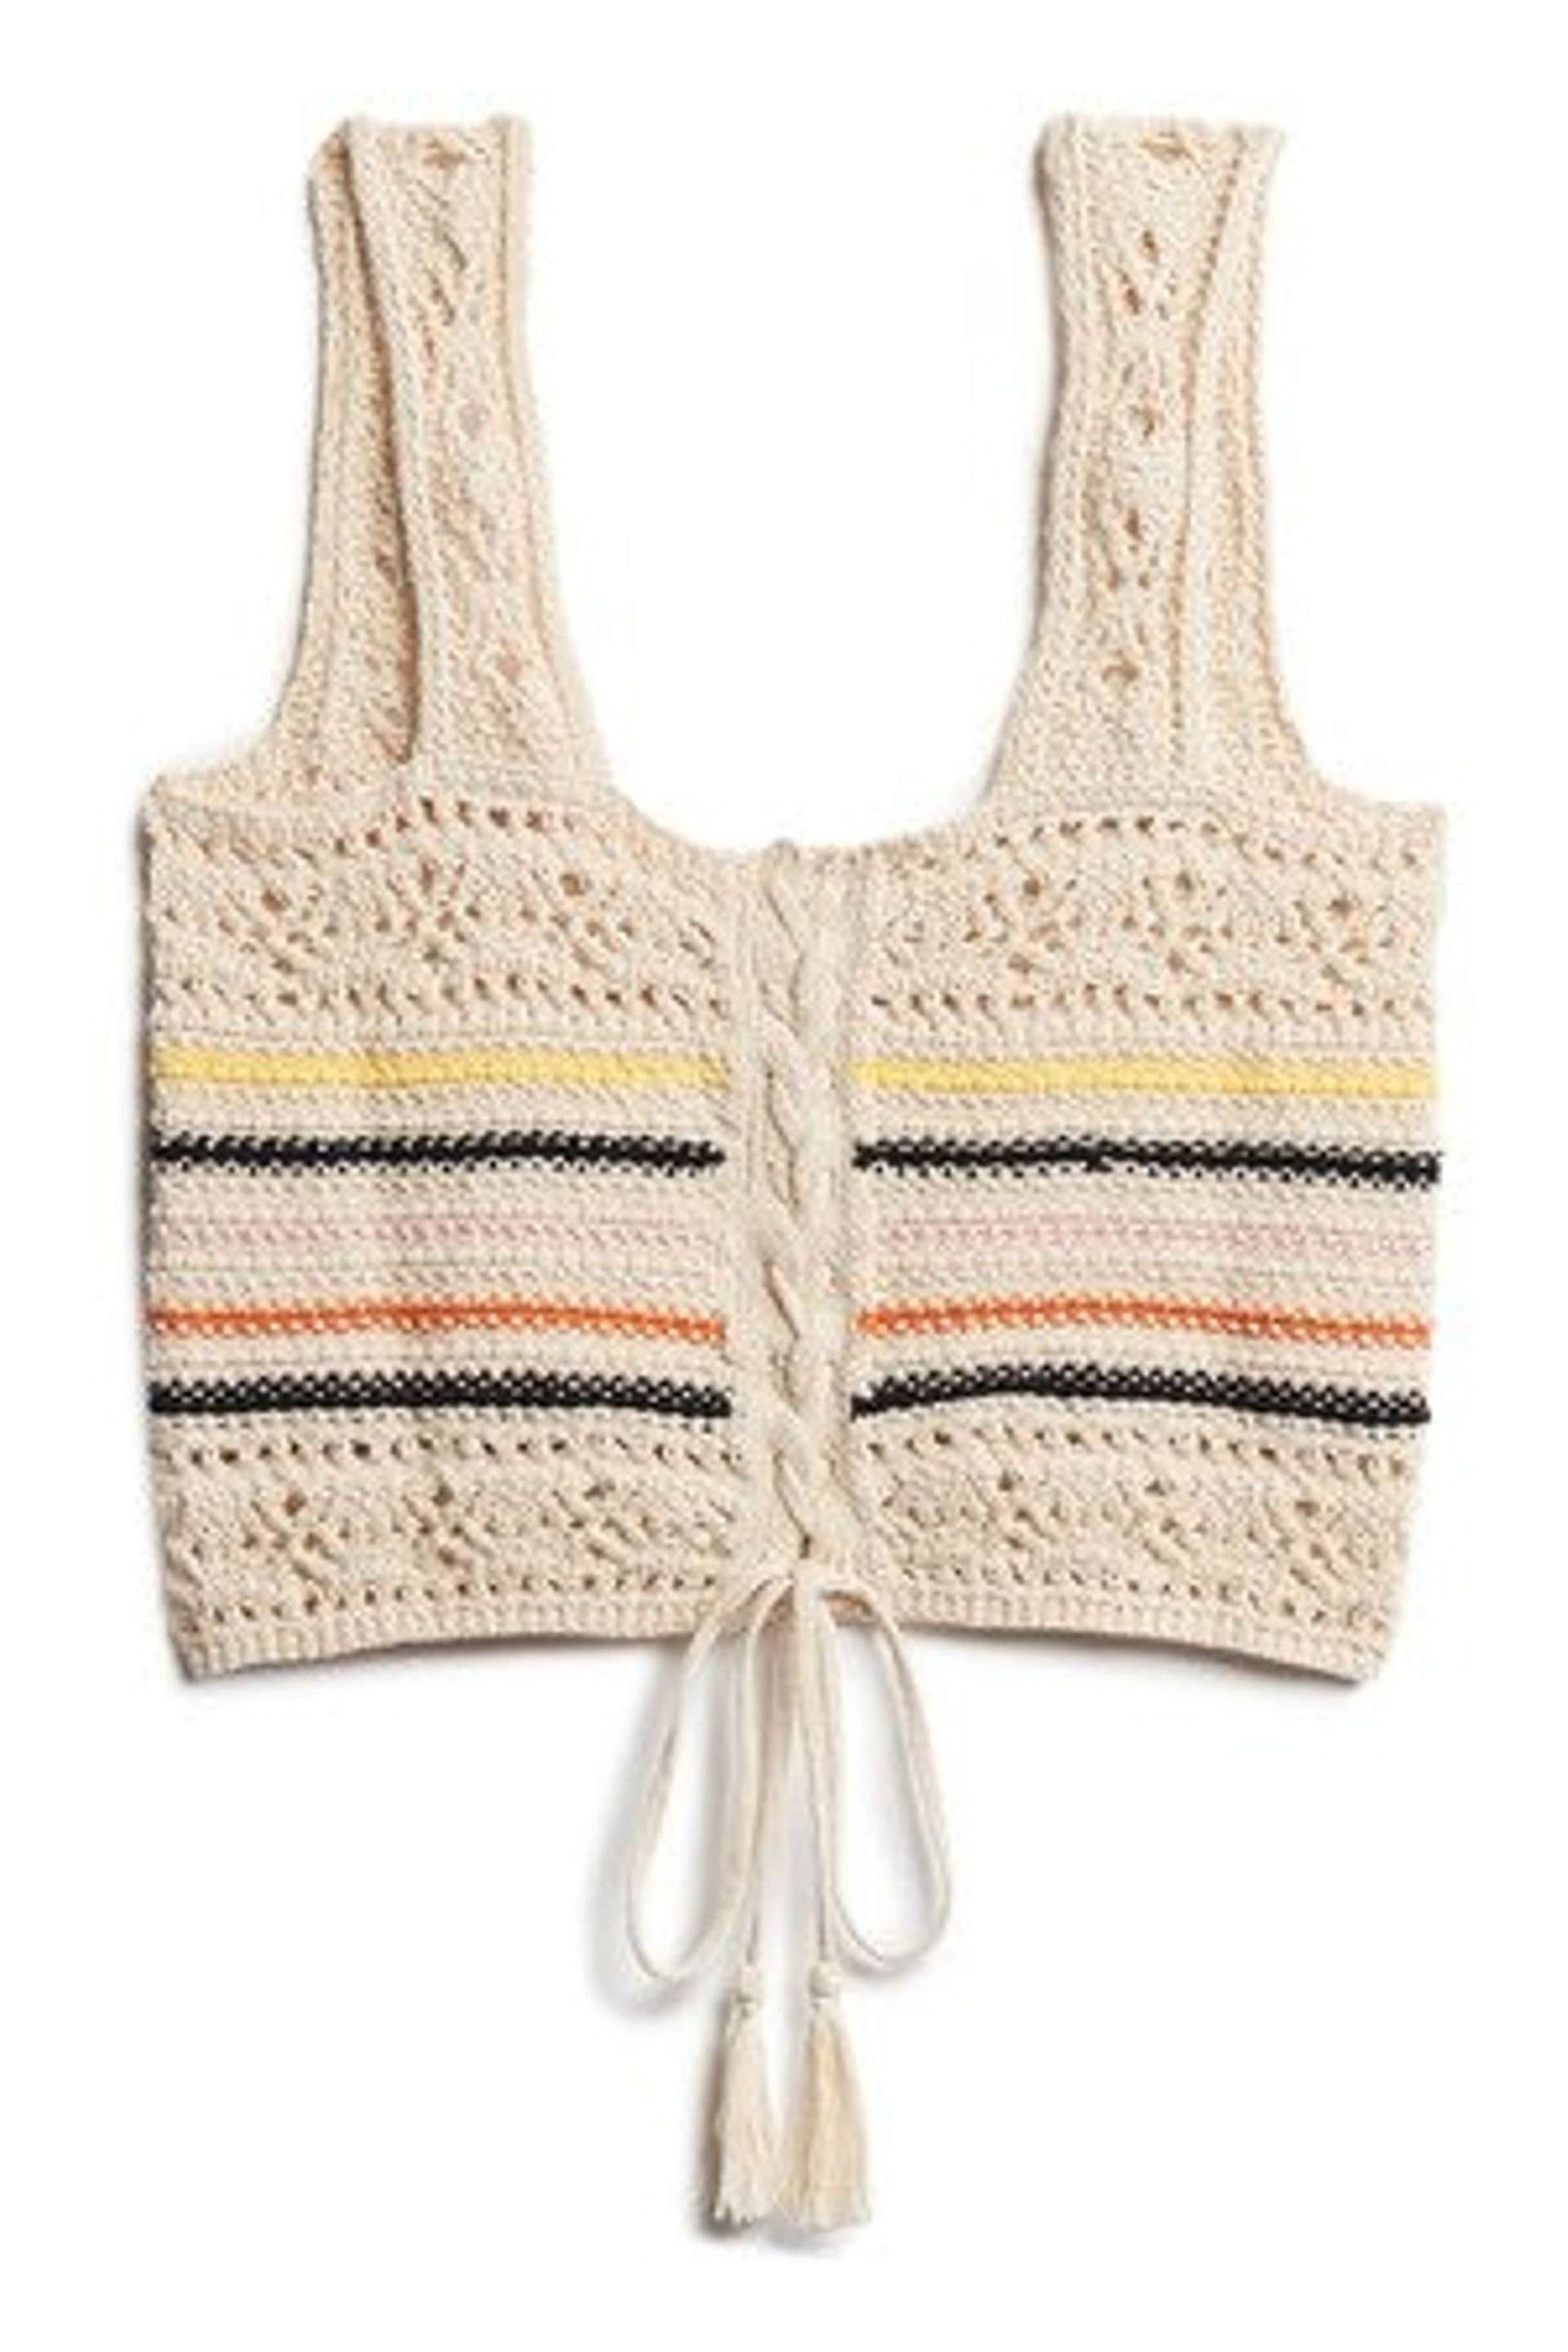 Superdry Cream Lace-up Crochet Cropped Vest Top - Image 5 of 6